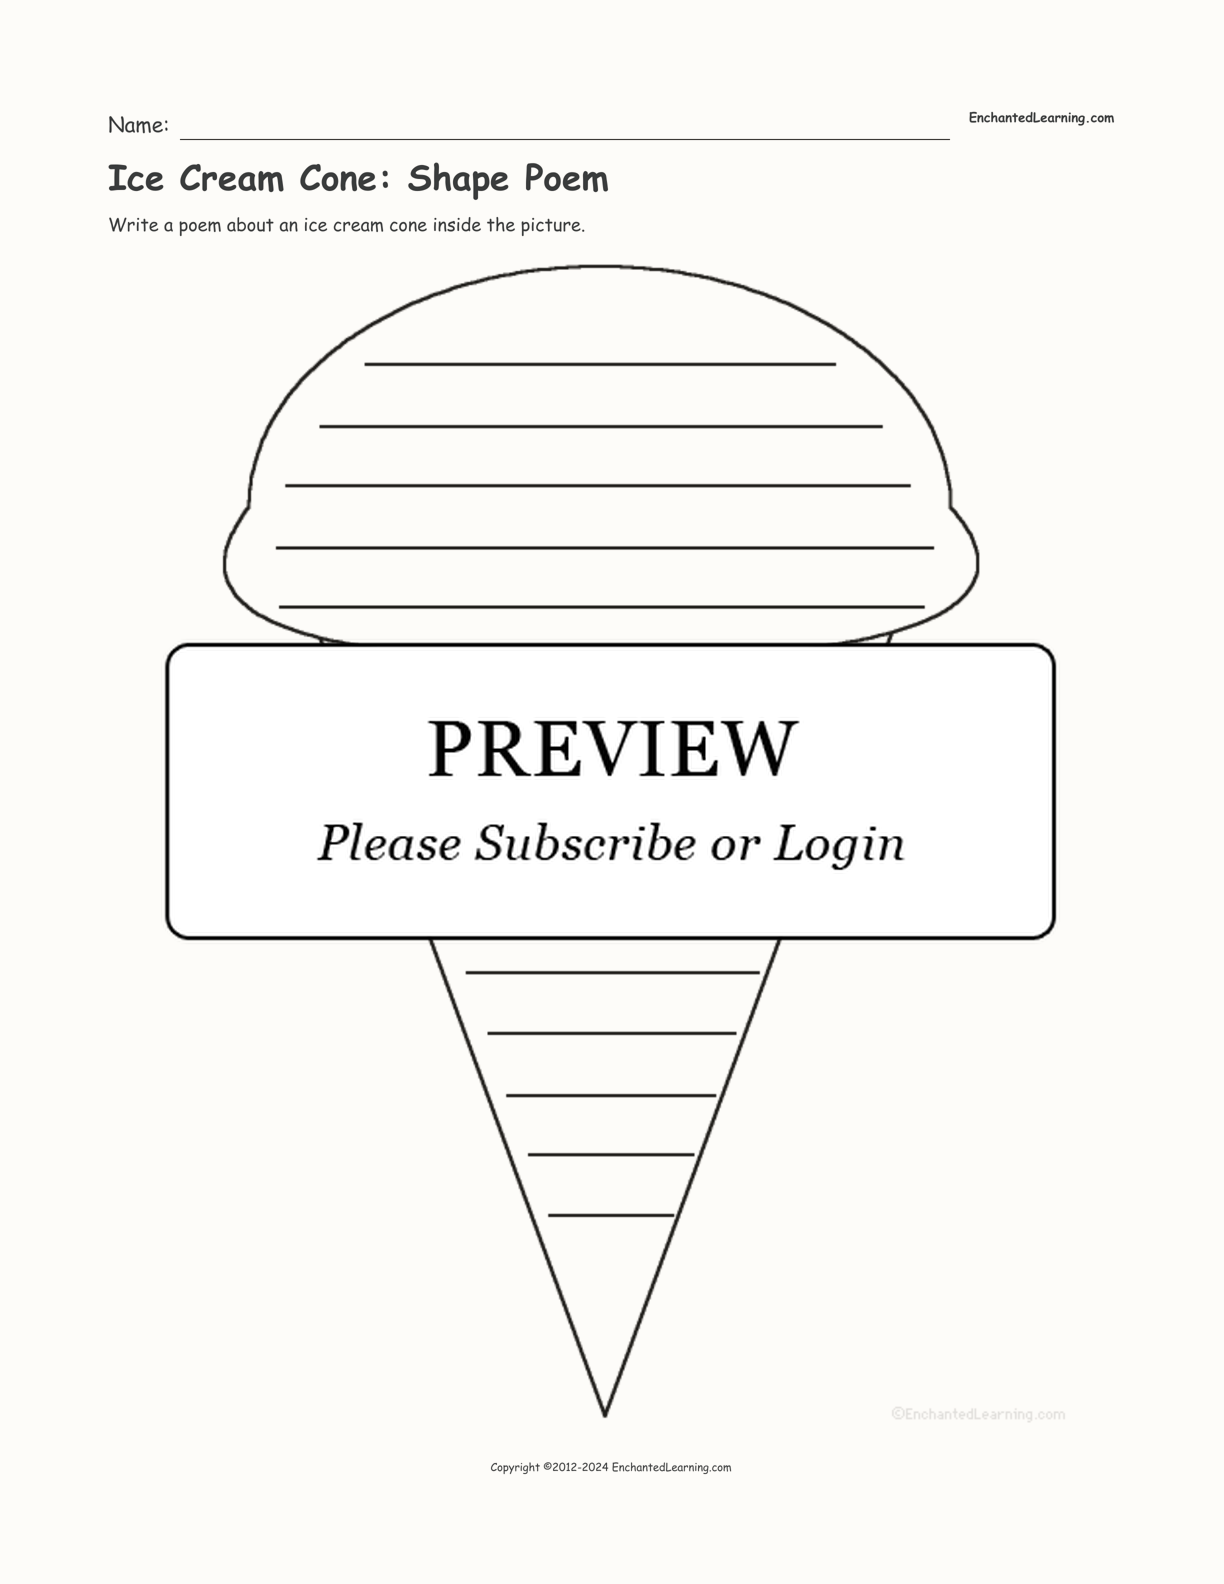 Ice Cream Cone: Shape Poem interactive worksheet page 1